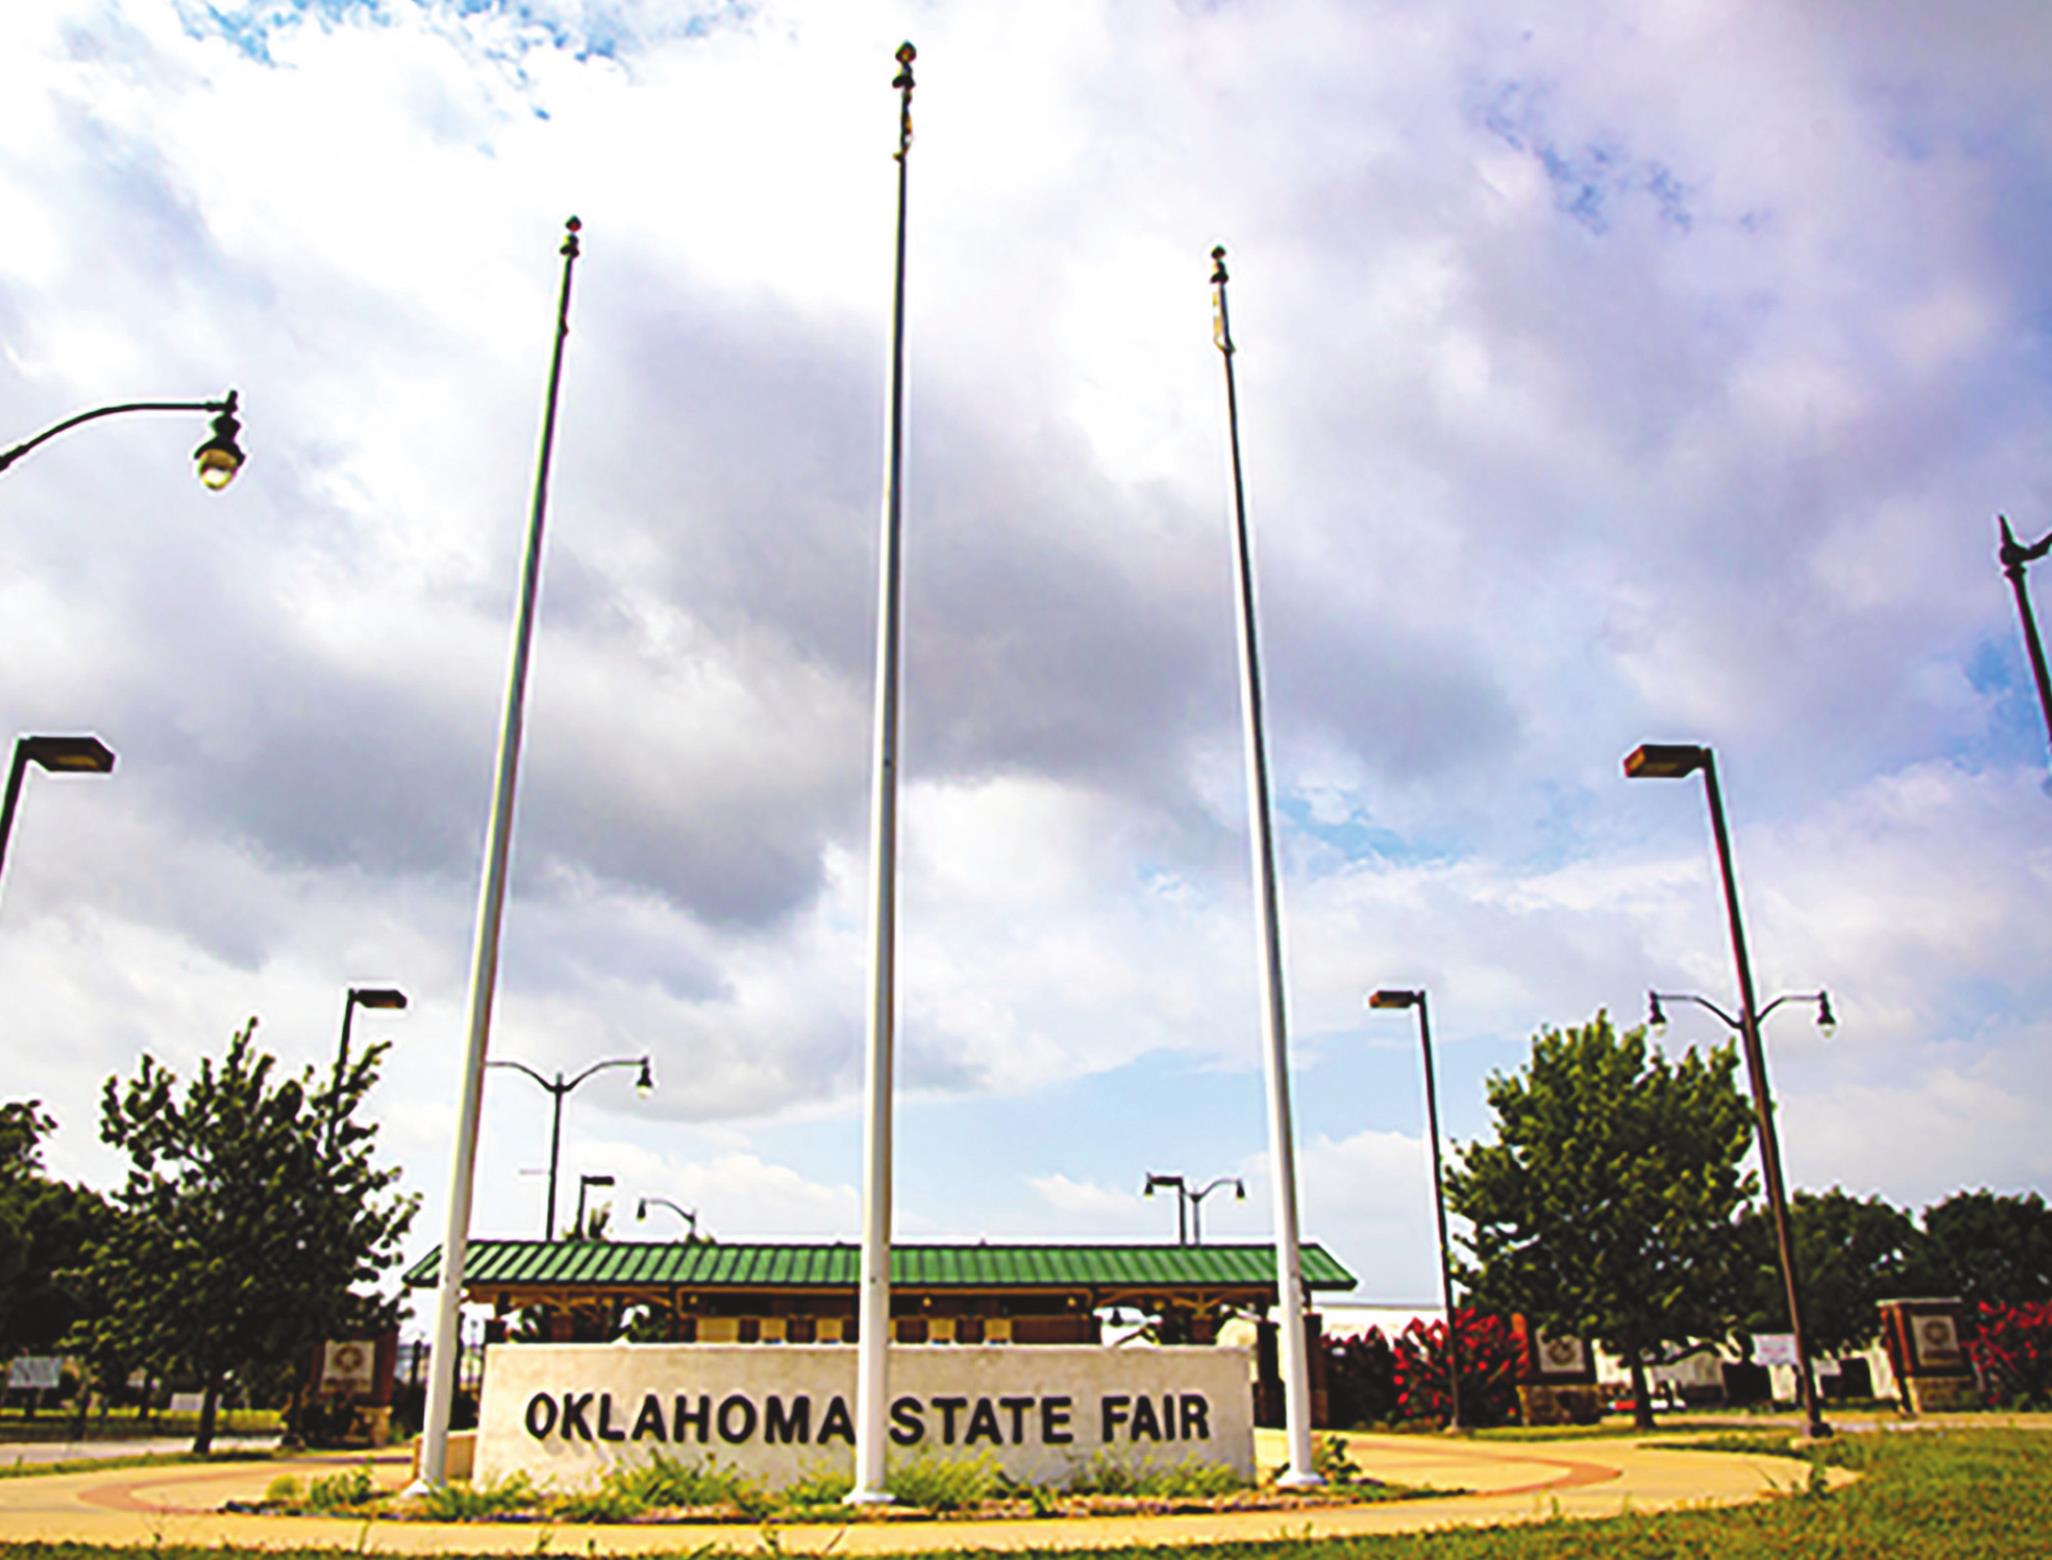 Officials with the Oklahoma State Fair announced the annual event will not be happening this fall due to the COVID-19 pandemic. But all is not lost for 4-H’ers who were planning exhibits and prepping show animals for the fair season. Provided